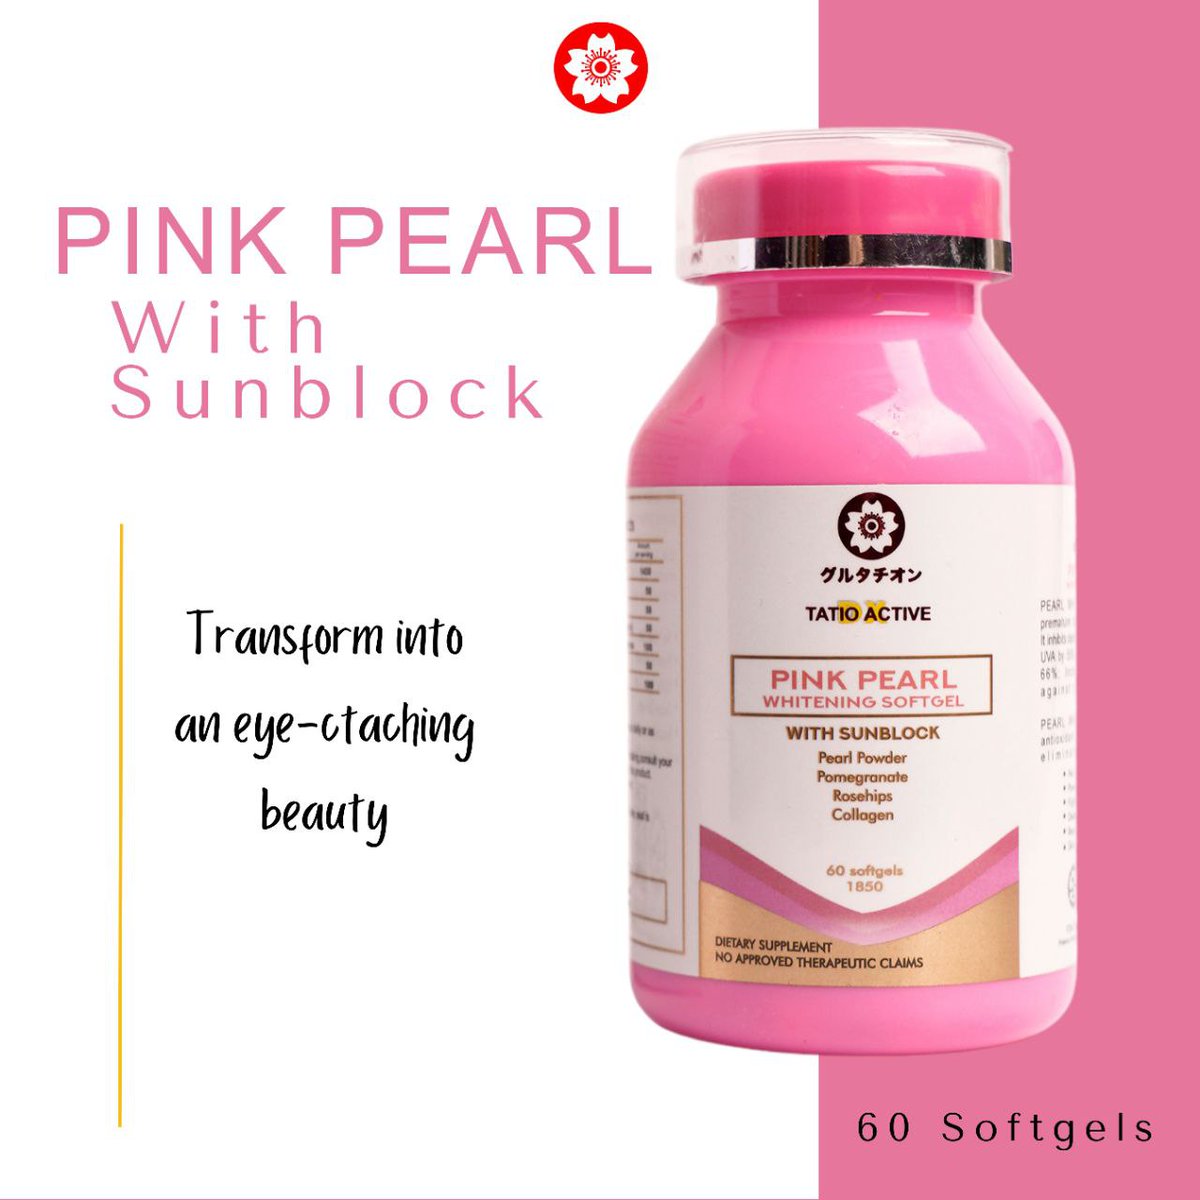 Enhance your glow with the power of pinkish pearl and sunblock in a convenient softgel! 🌞💖
Also available for COD:

Shopee: shp.ee/llhoiyd

Lazada: rb.gy/cbq9n

#BeautyEssentials #tatioactivedxjapan #tatioactivedx #antiaging #sunblock #softgels